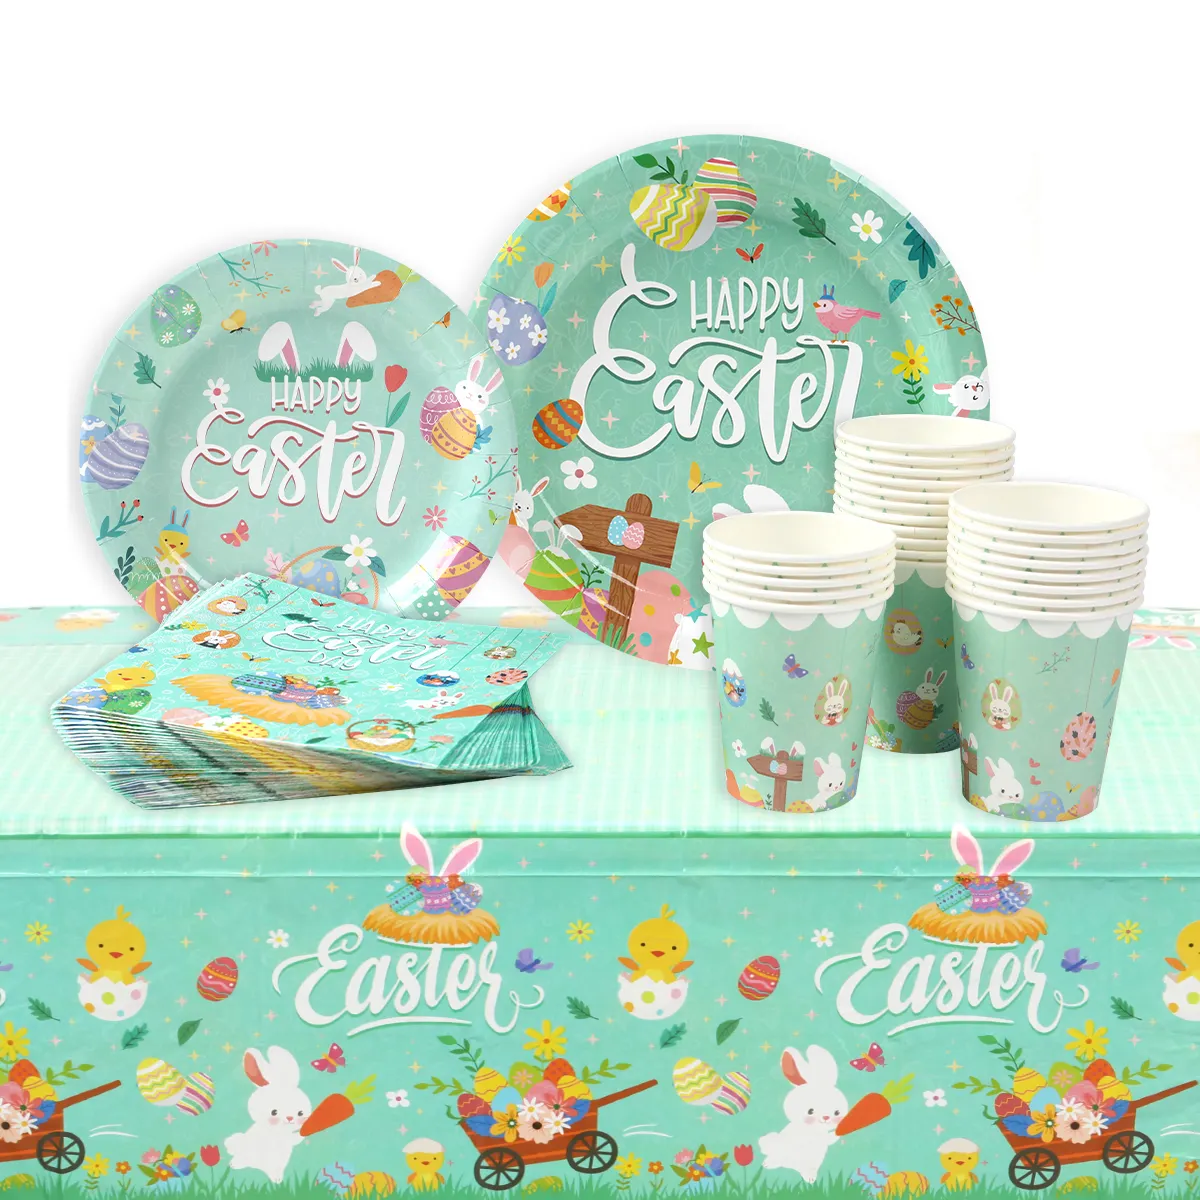 Easter Bunny Disposable Tableware Set Serving 12 People Party Tableware Paper Plates Cups Napkins For Easter Decoration